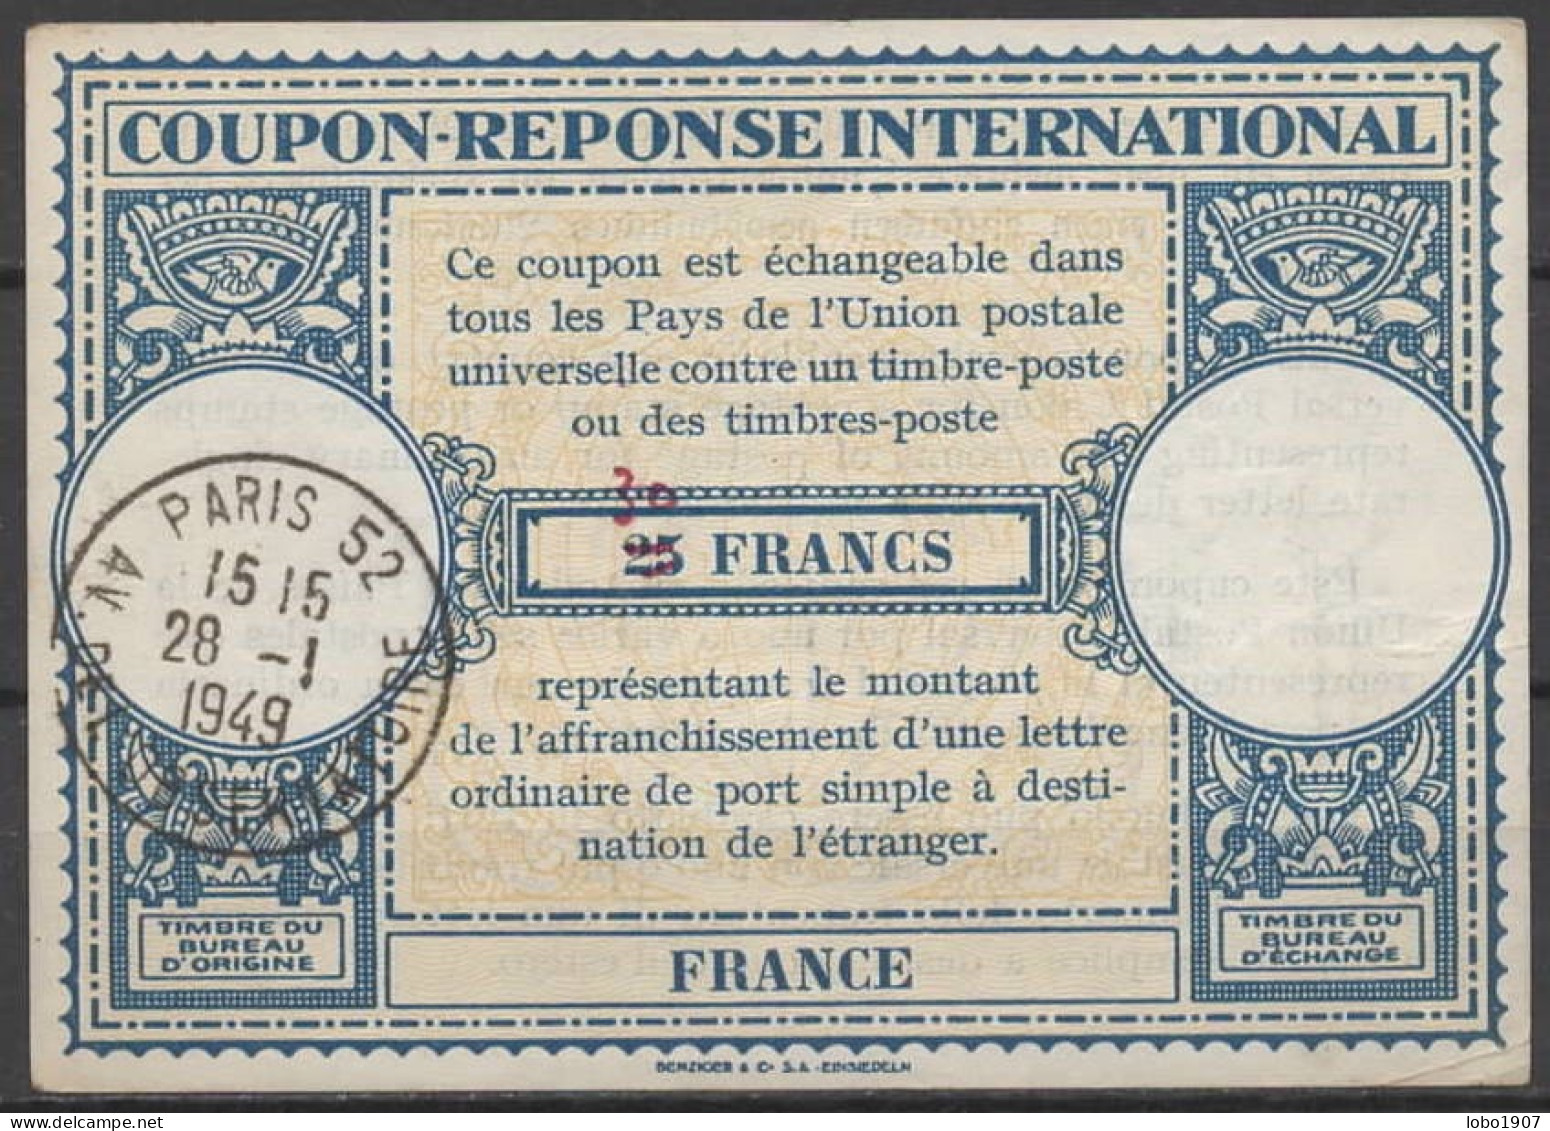 FRANCE  Lo14o  30 / 25 FRANCS  International Reply Coupon Reponse Antwortschein IRC IAS O PARIS 52 AV. DE L'OBSERVATOIRE - Antwoordbons